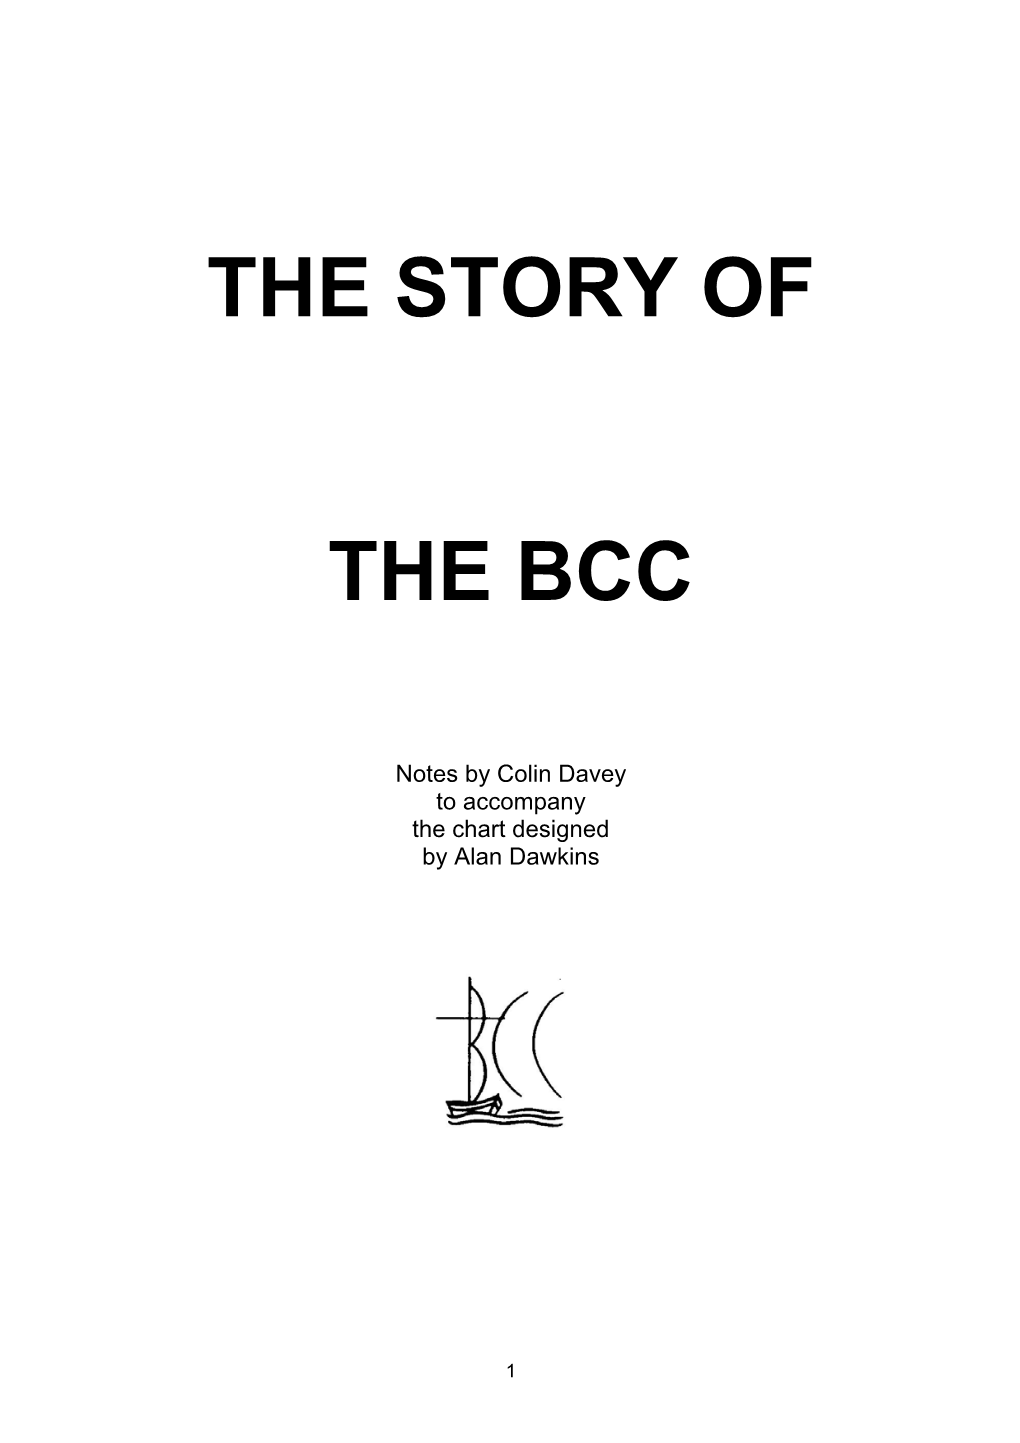 The Story of the BCC - Follow the Pilgrim Road' Has Been Designed by Alan Dawkins with Notes by Colin Davey